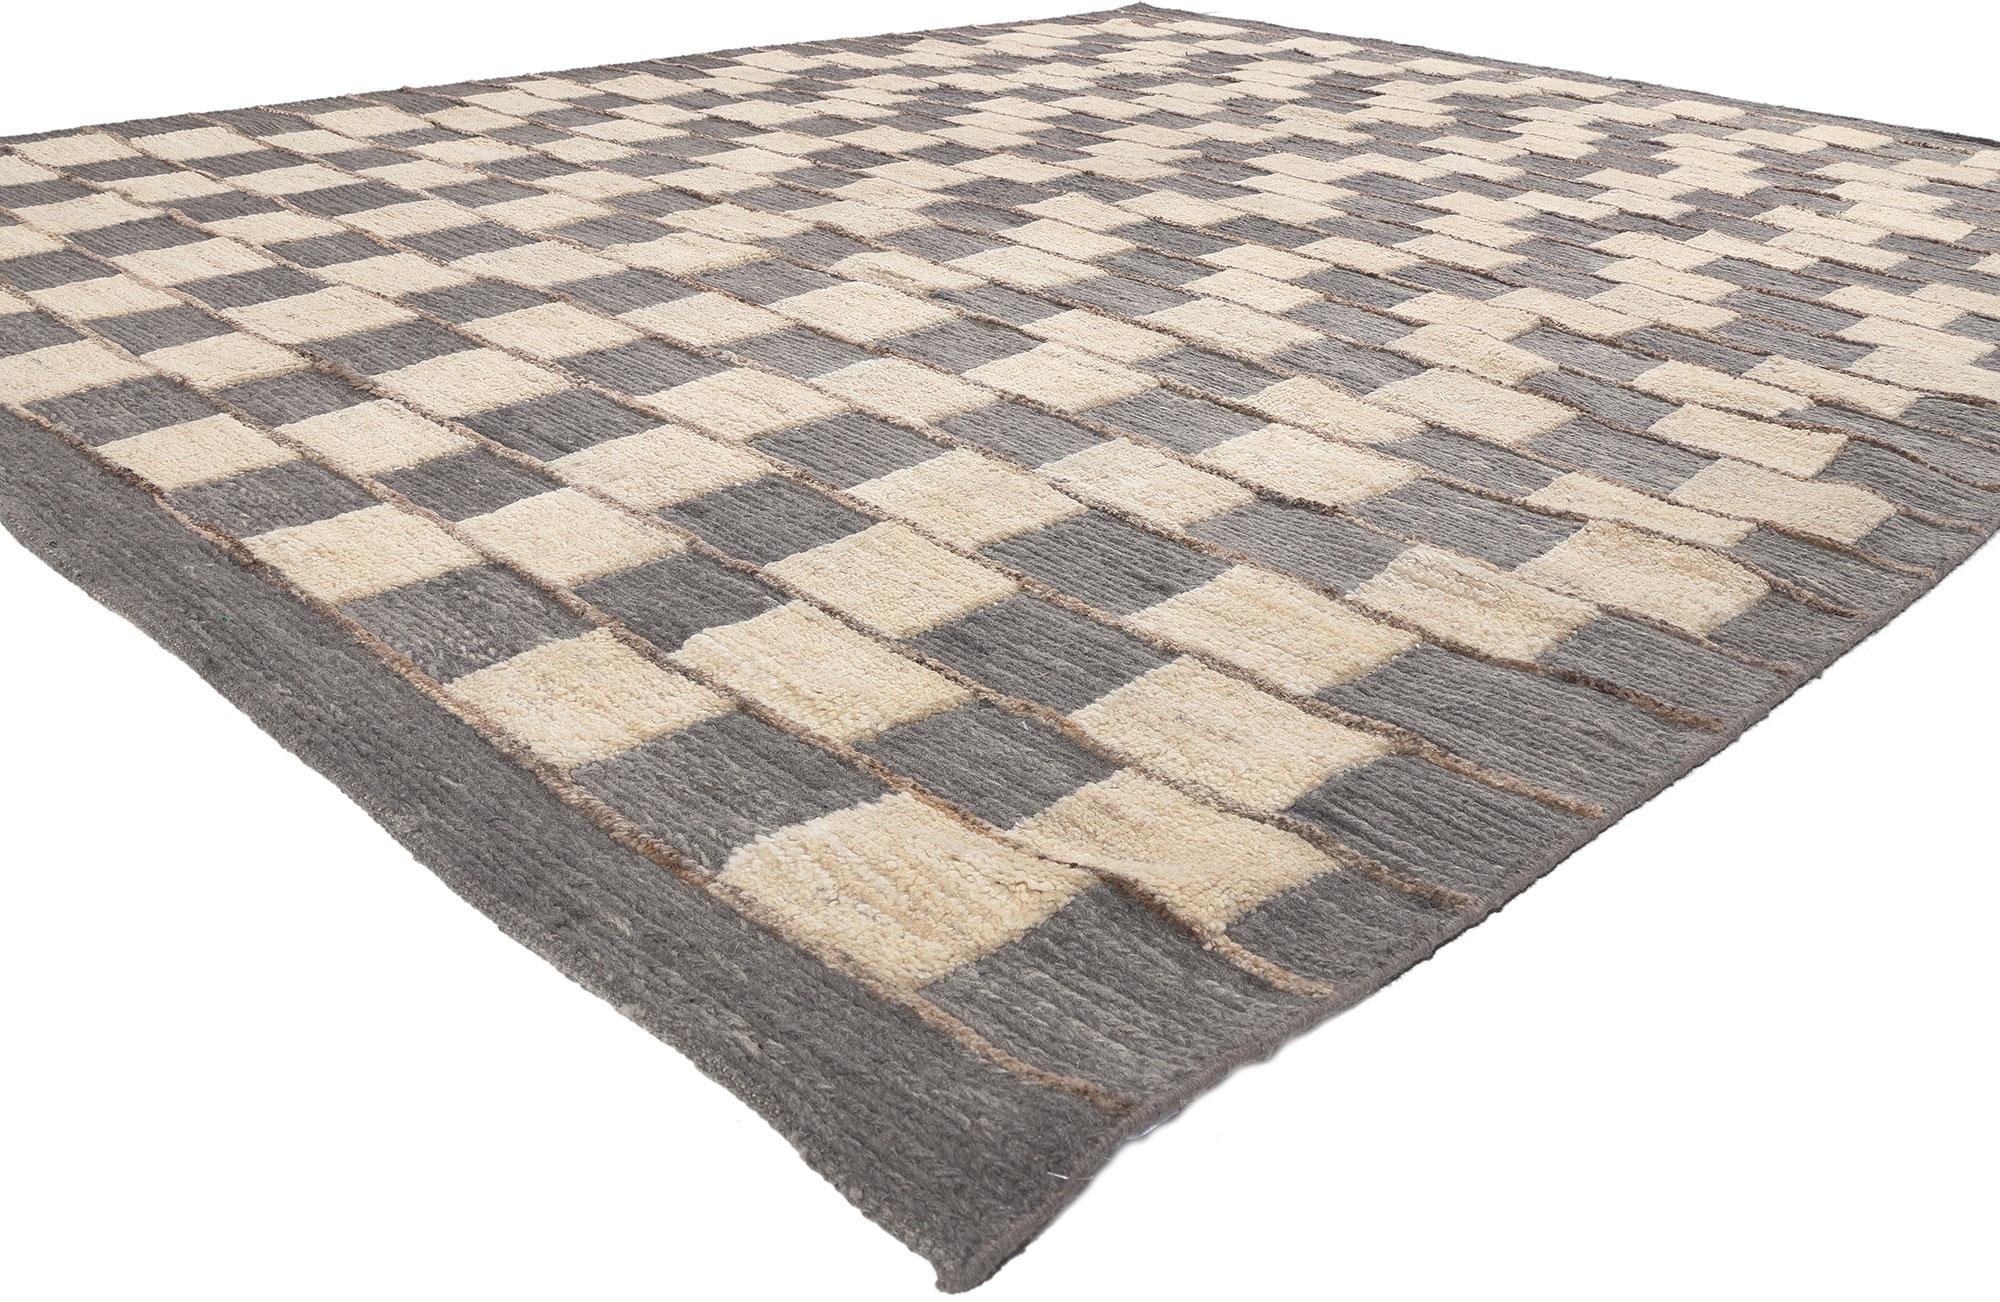 Organic Brutalist Moroccan Textured Rug Neutral Earth-Tones For Sale 1